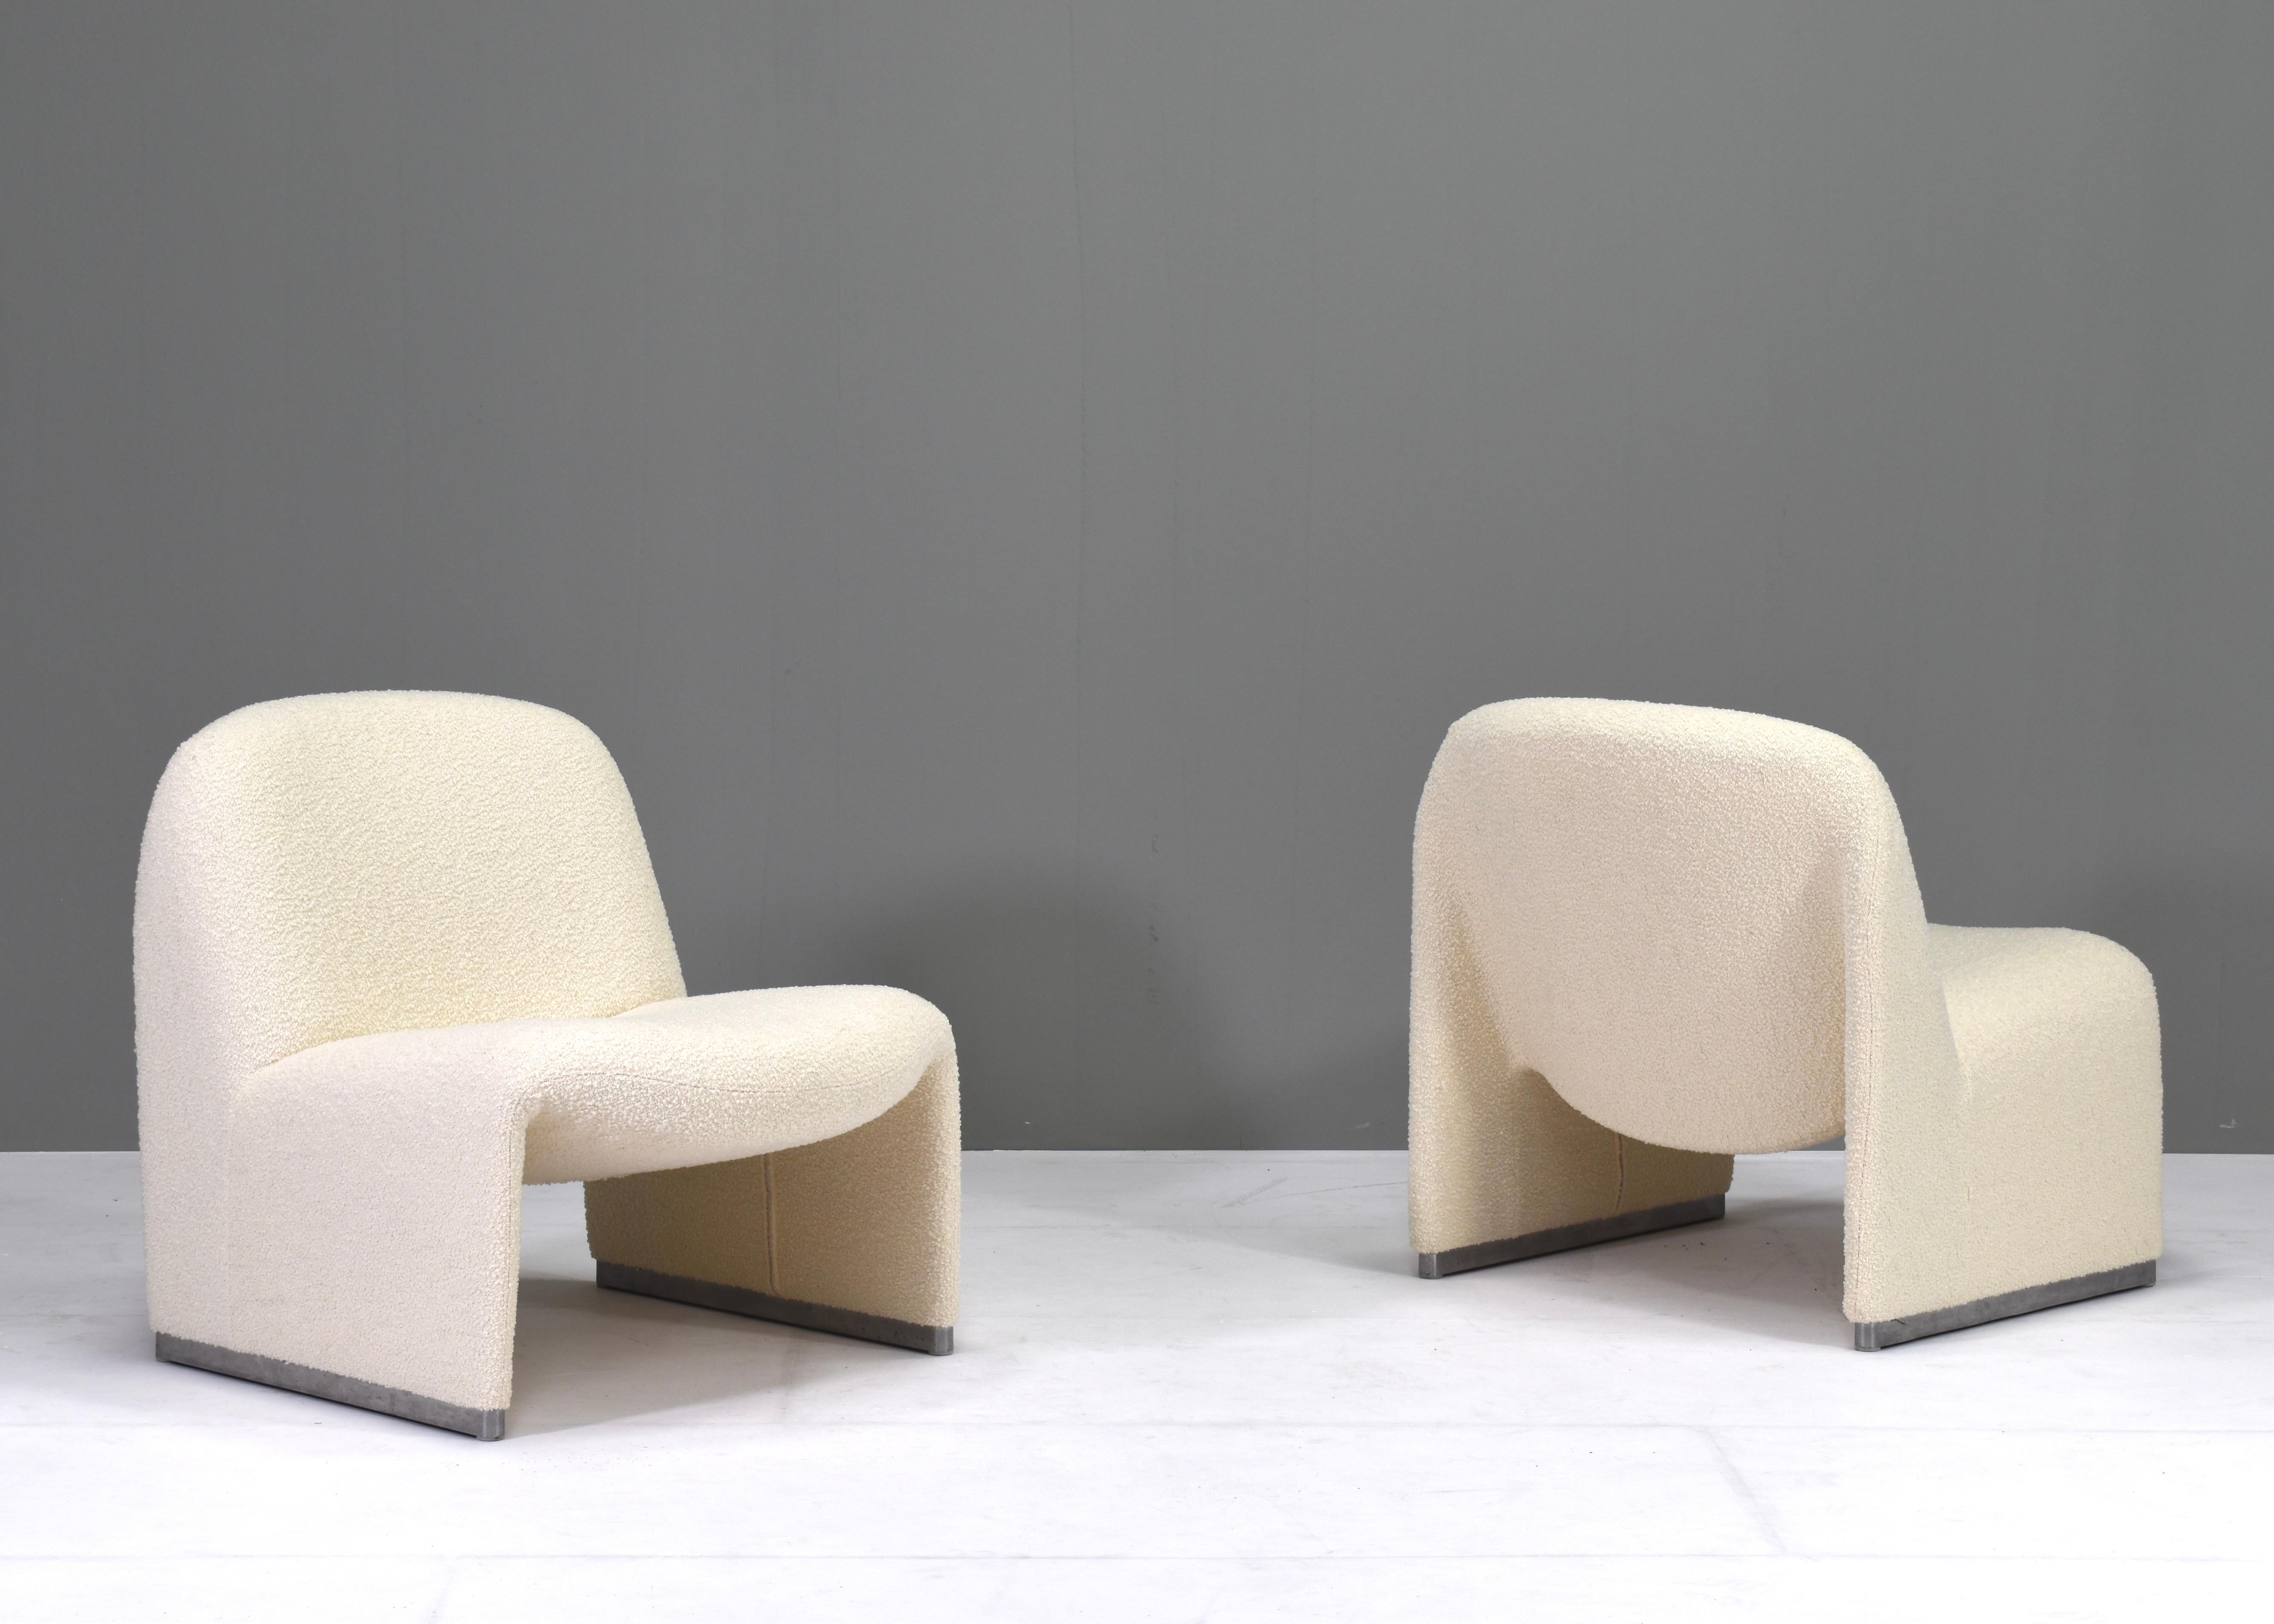 Pair of Alky chairs by Giancarlo Piretti for Castelli – Italy, circa 1970.
The chairs have been new reupholstered in a beautiful off-white bouclé fabric from Paris, France.
Designer: Giancarlo Piretti
Manufacturer: Castelli or Artifort. This